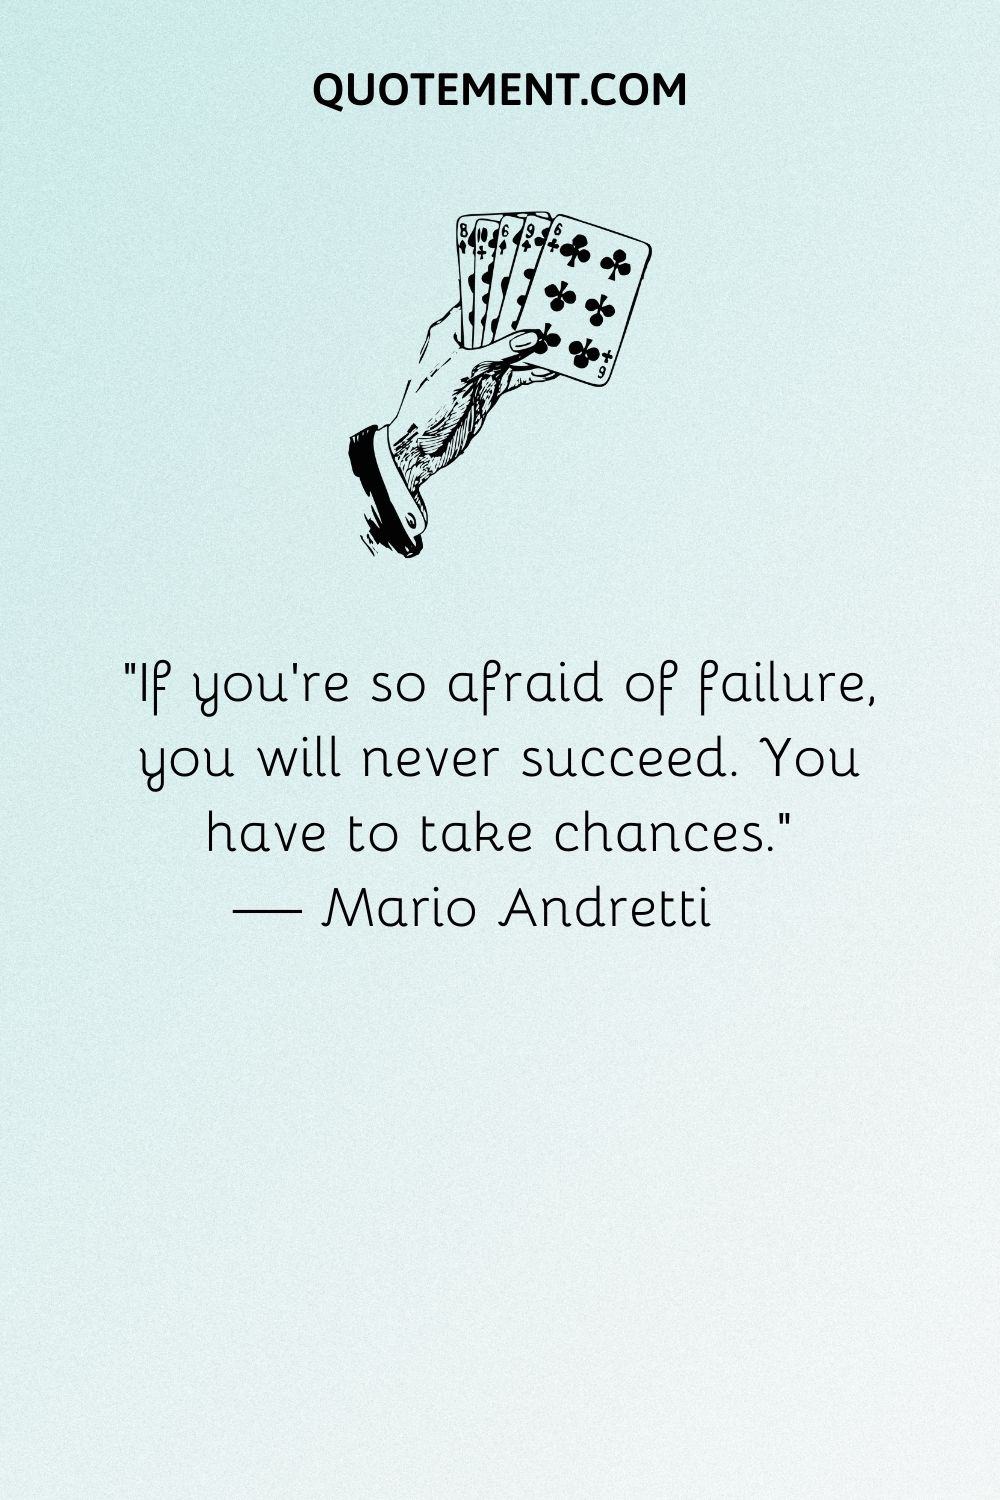 If you’re so afraid of failure, you will never succeed.